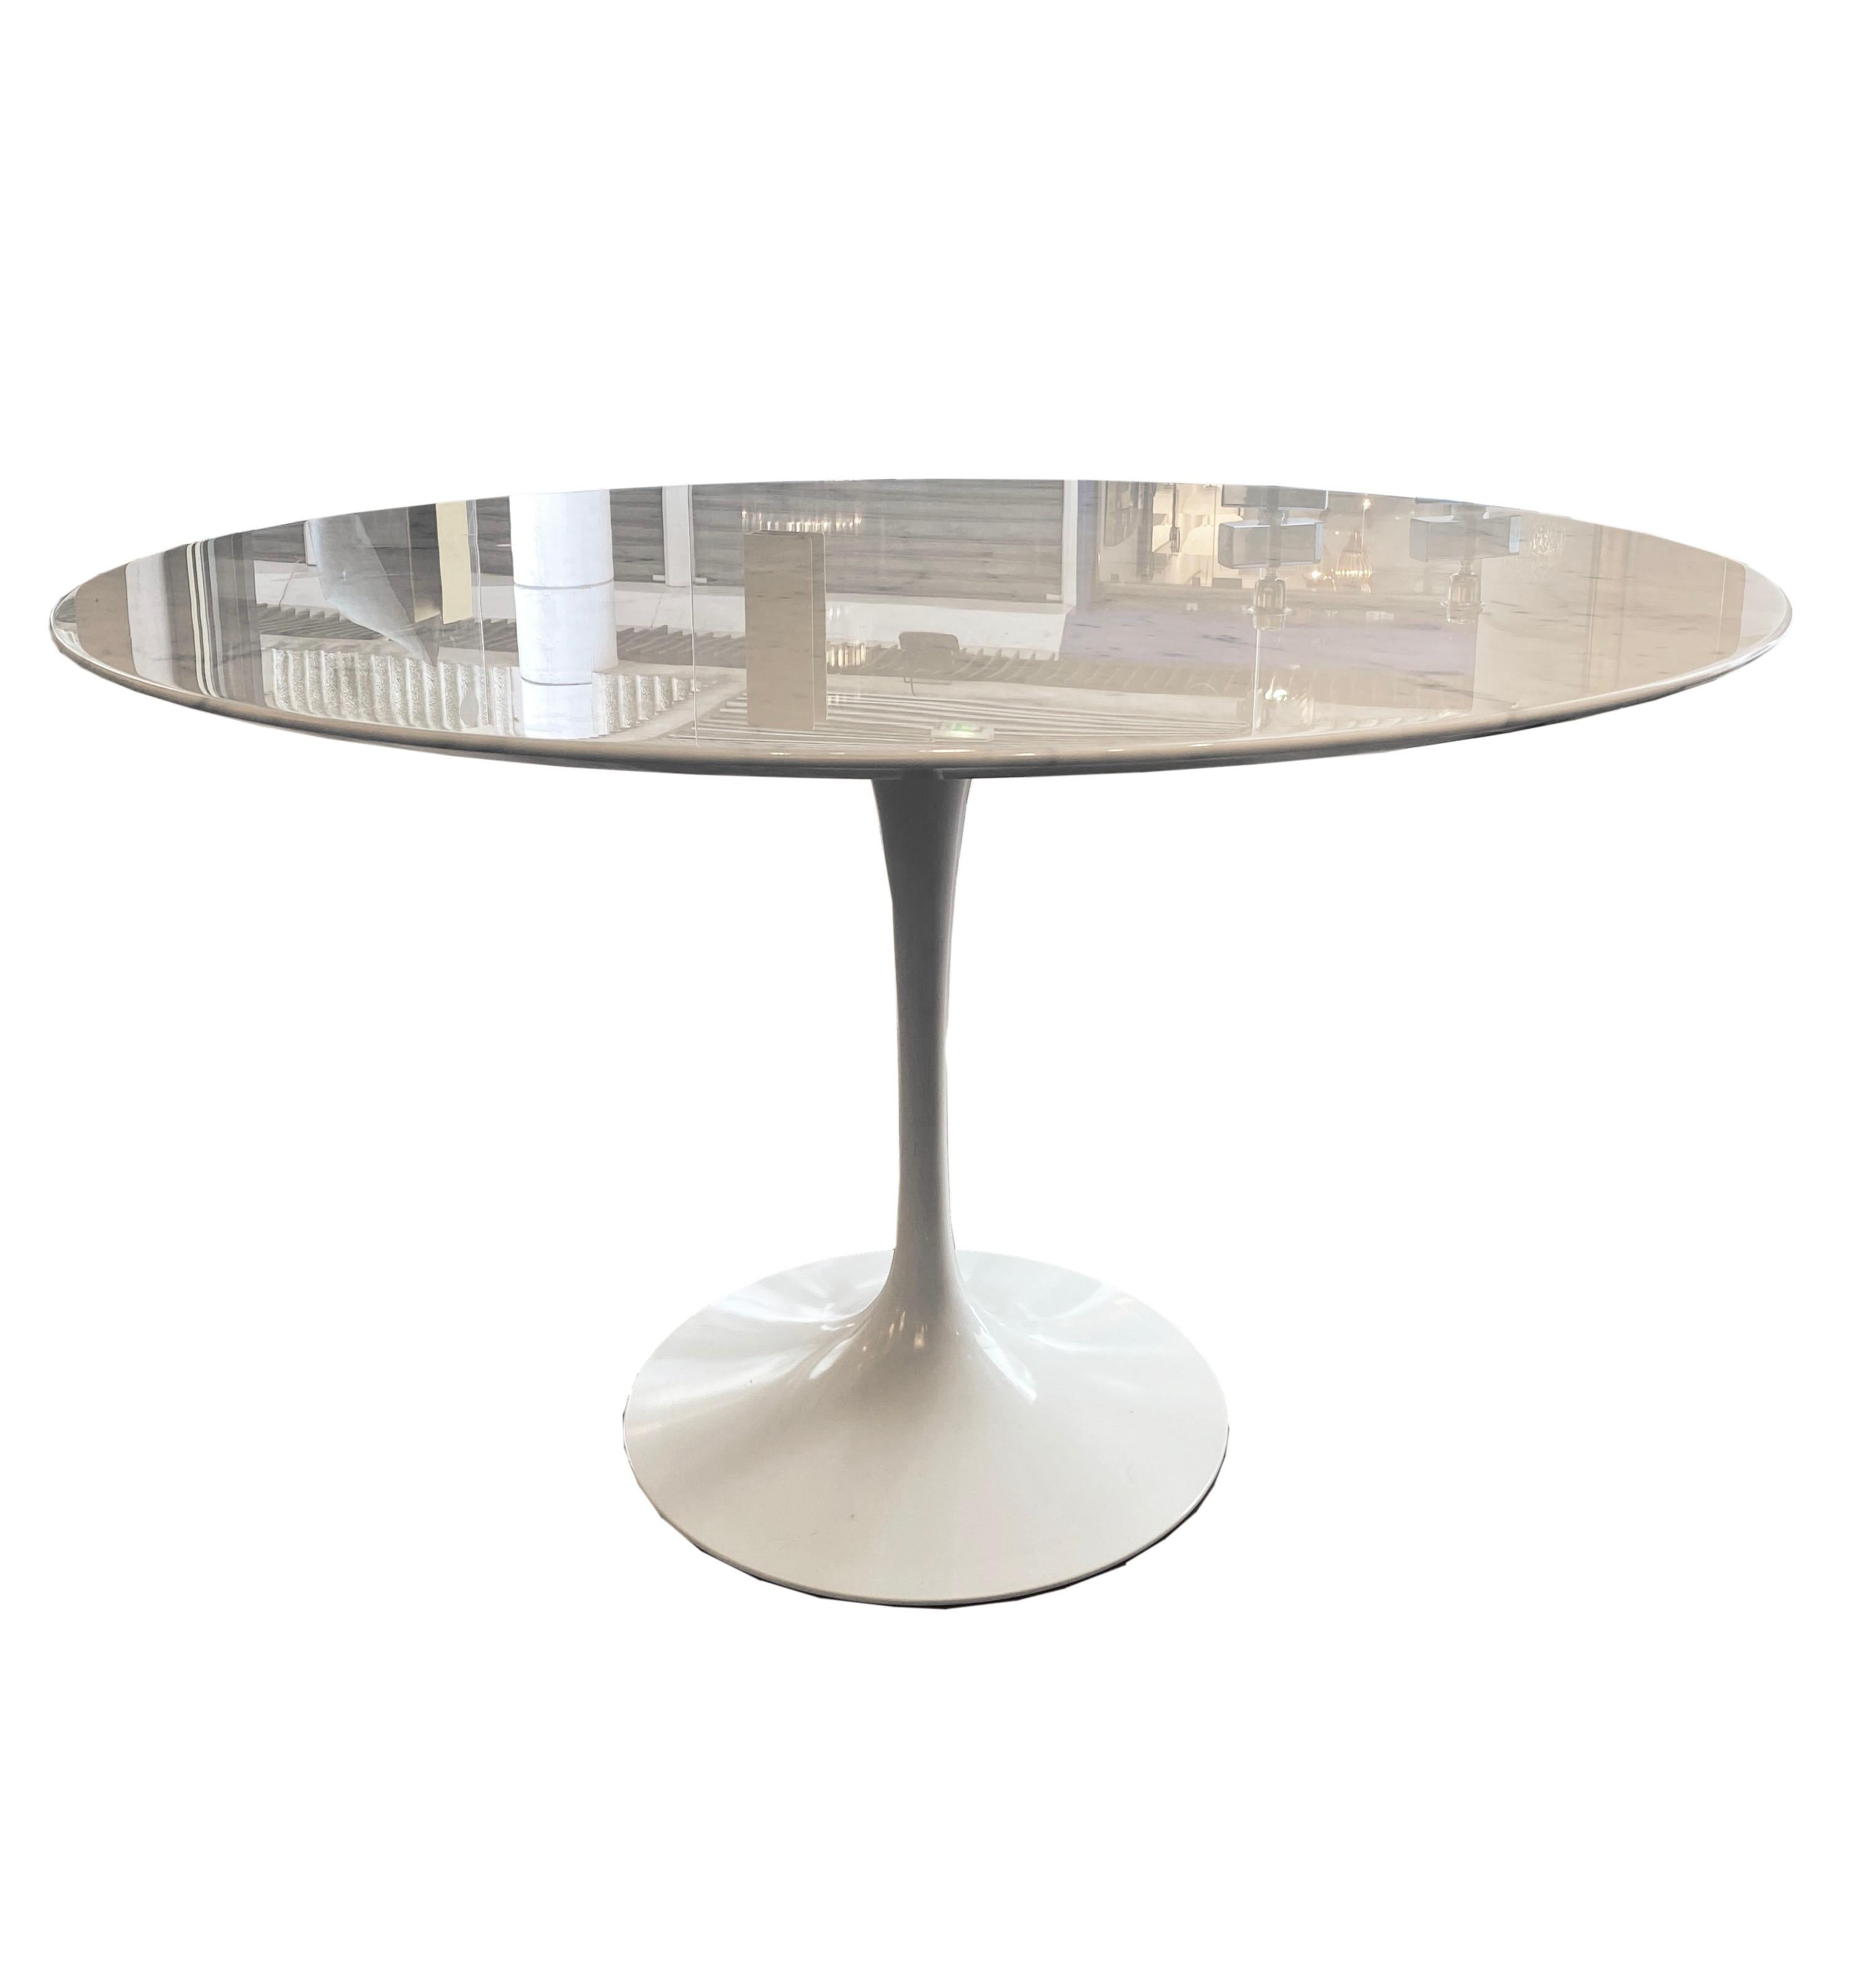 Saarinen
Tulip dining table
White marble statuarietto created in 1957
Measures: Diameter 120 cms x height 72 cms
White foot
Knoll edition 2020
New from stock
3900 Euros.